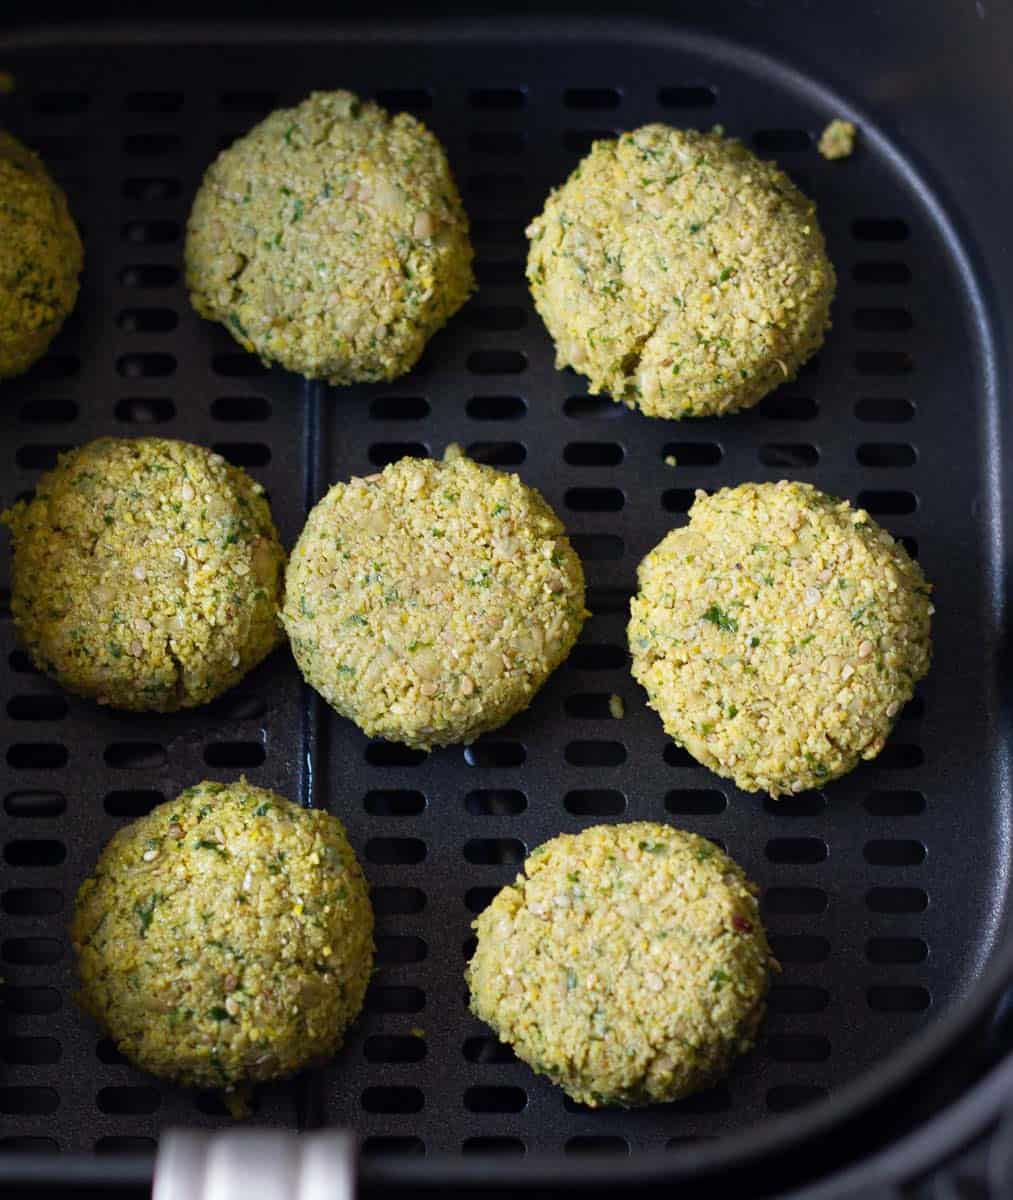 place the falafels in the air fryer